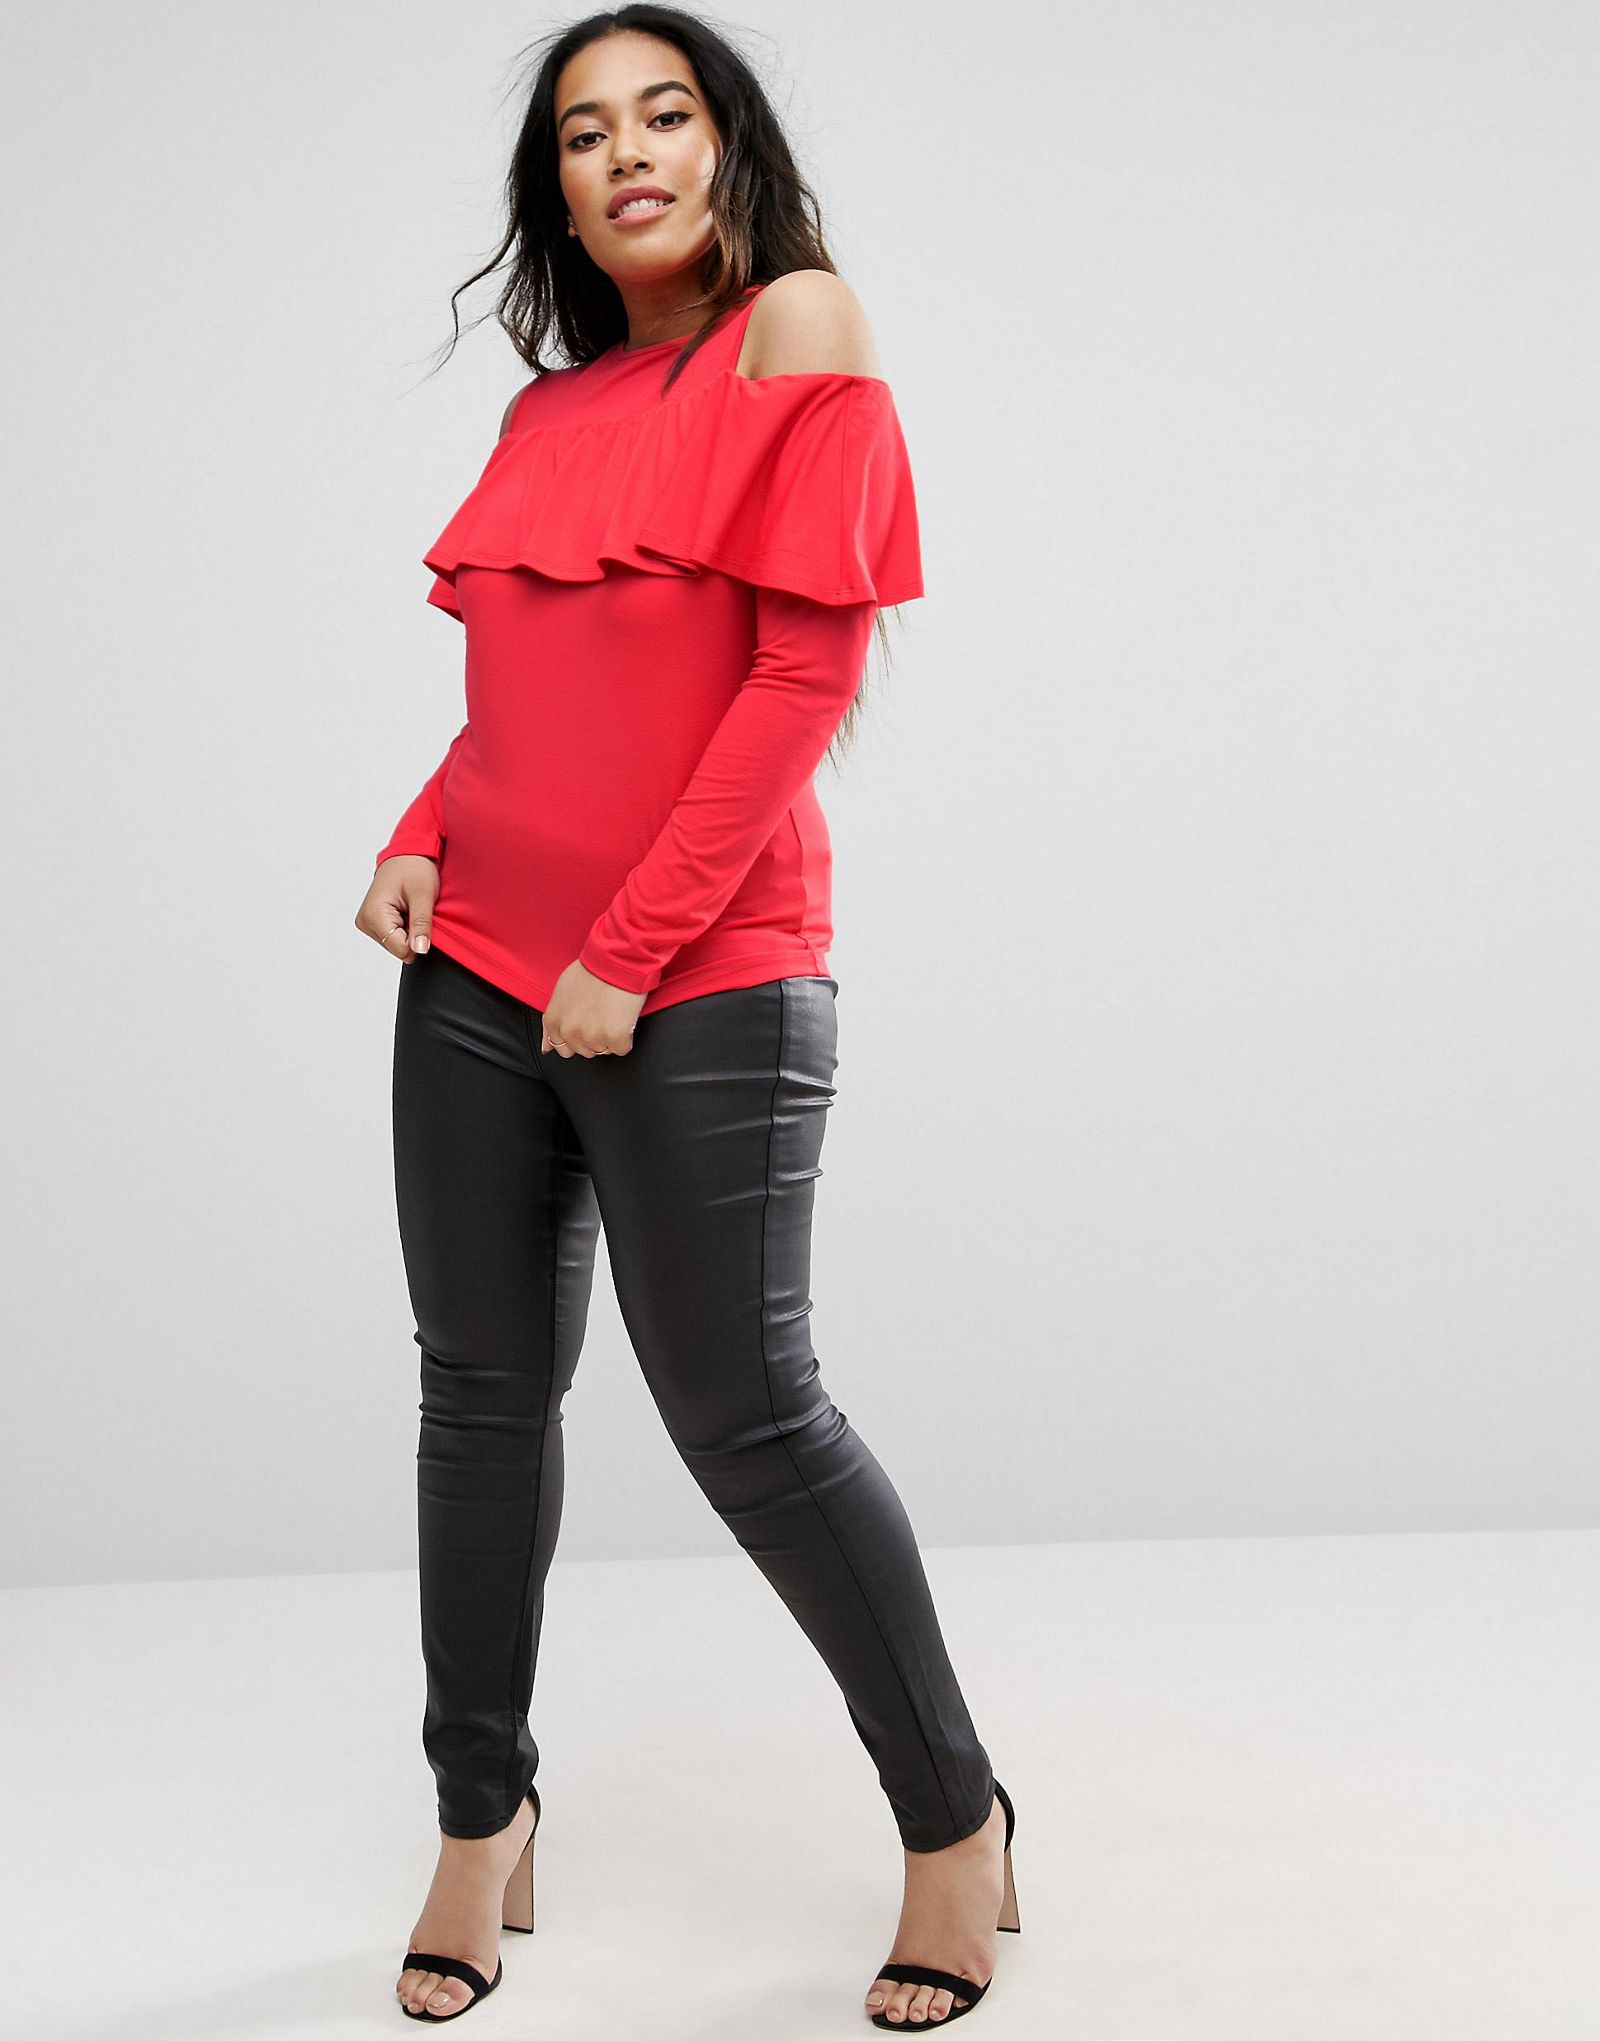 ASOS CURVE Top with Cold Shoulder Ruffle Detail